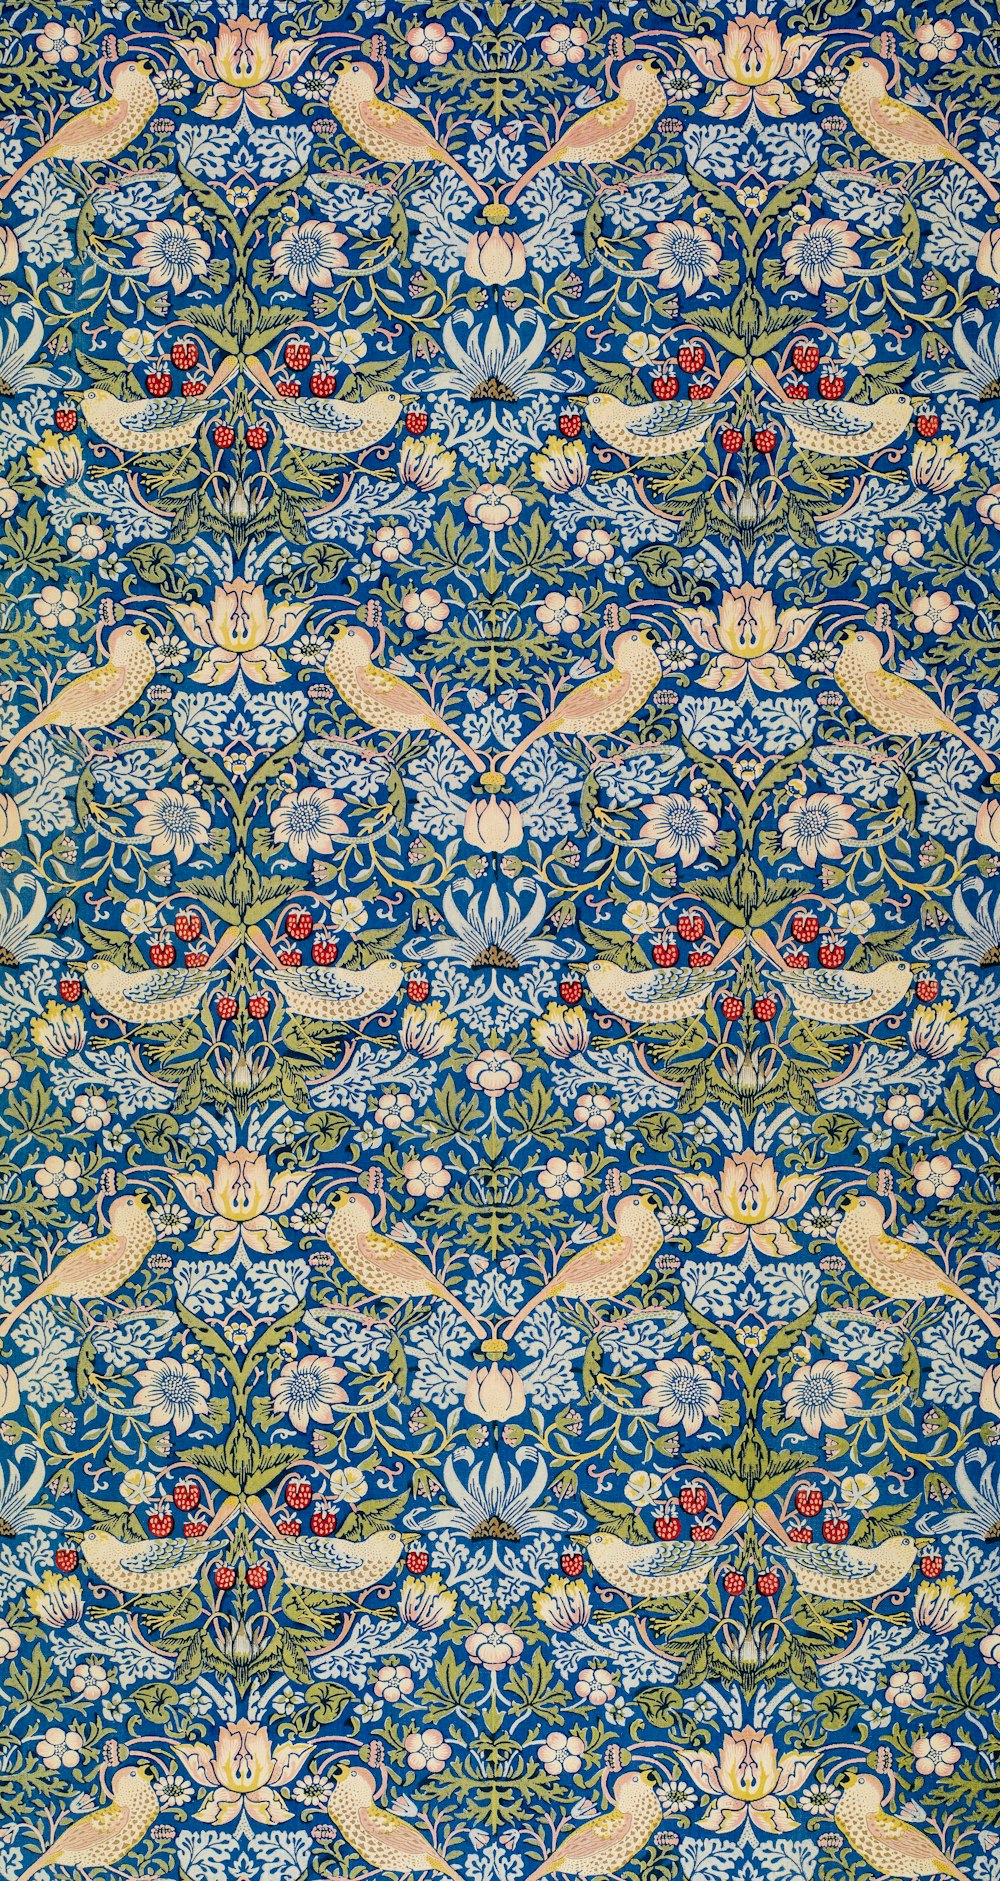 blue white and brown floral textile